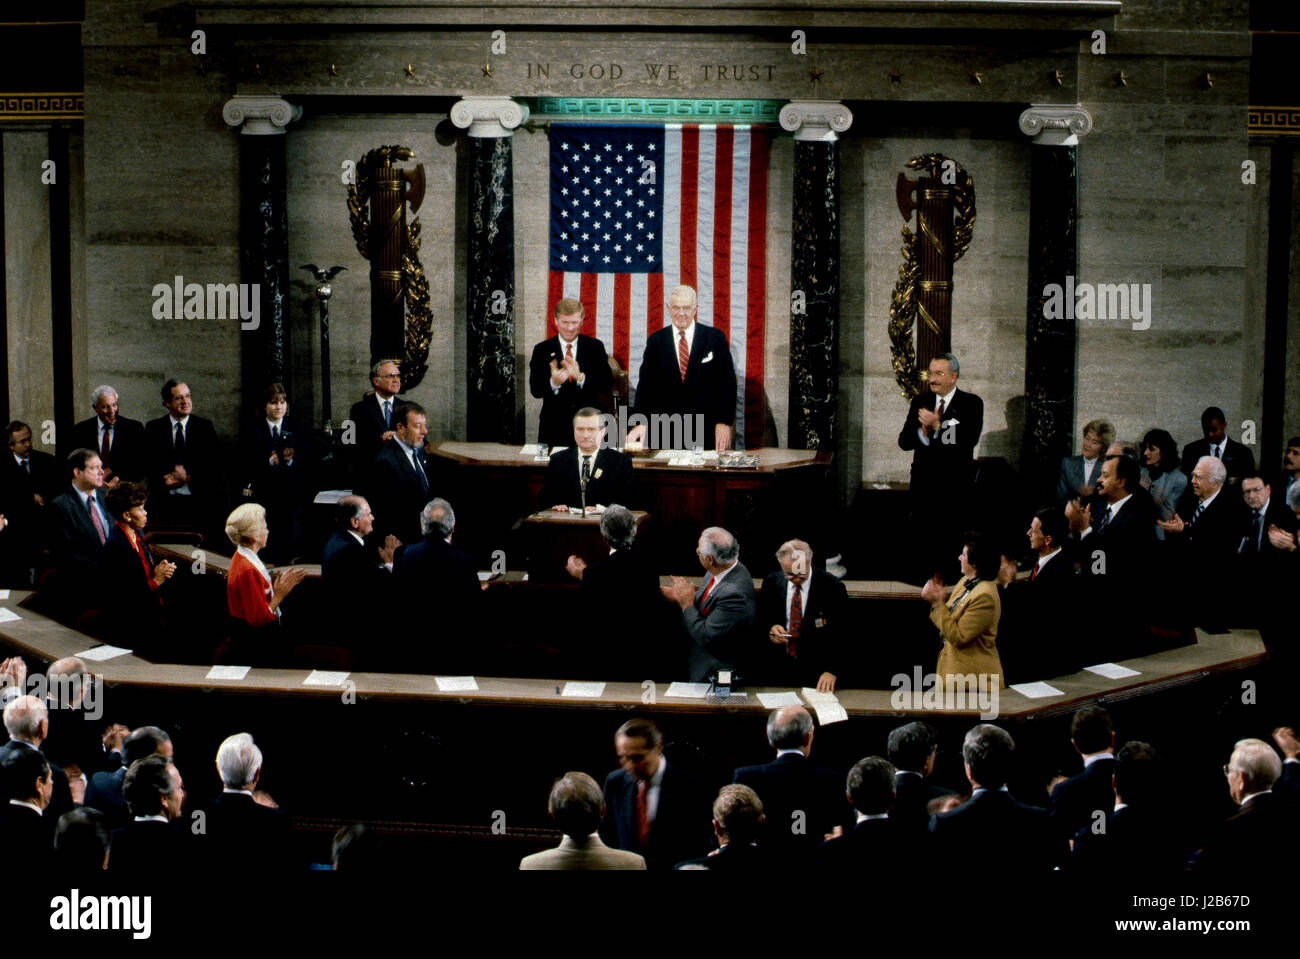 Polish Solidarity leader and Nobel Peace Prize winner Lech Walesa addresses a joint session of the US Congress in Washington DC., November 15, 1989.  Photo by Mark Reinstein Stock Photo